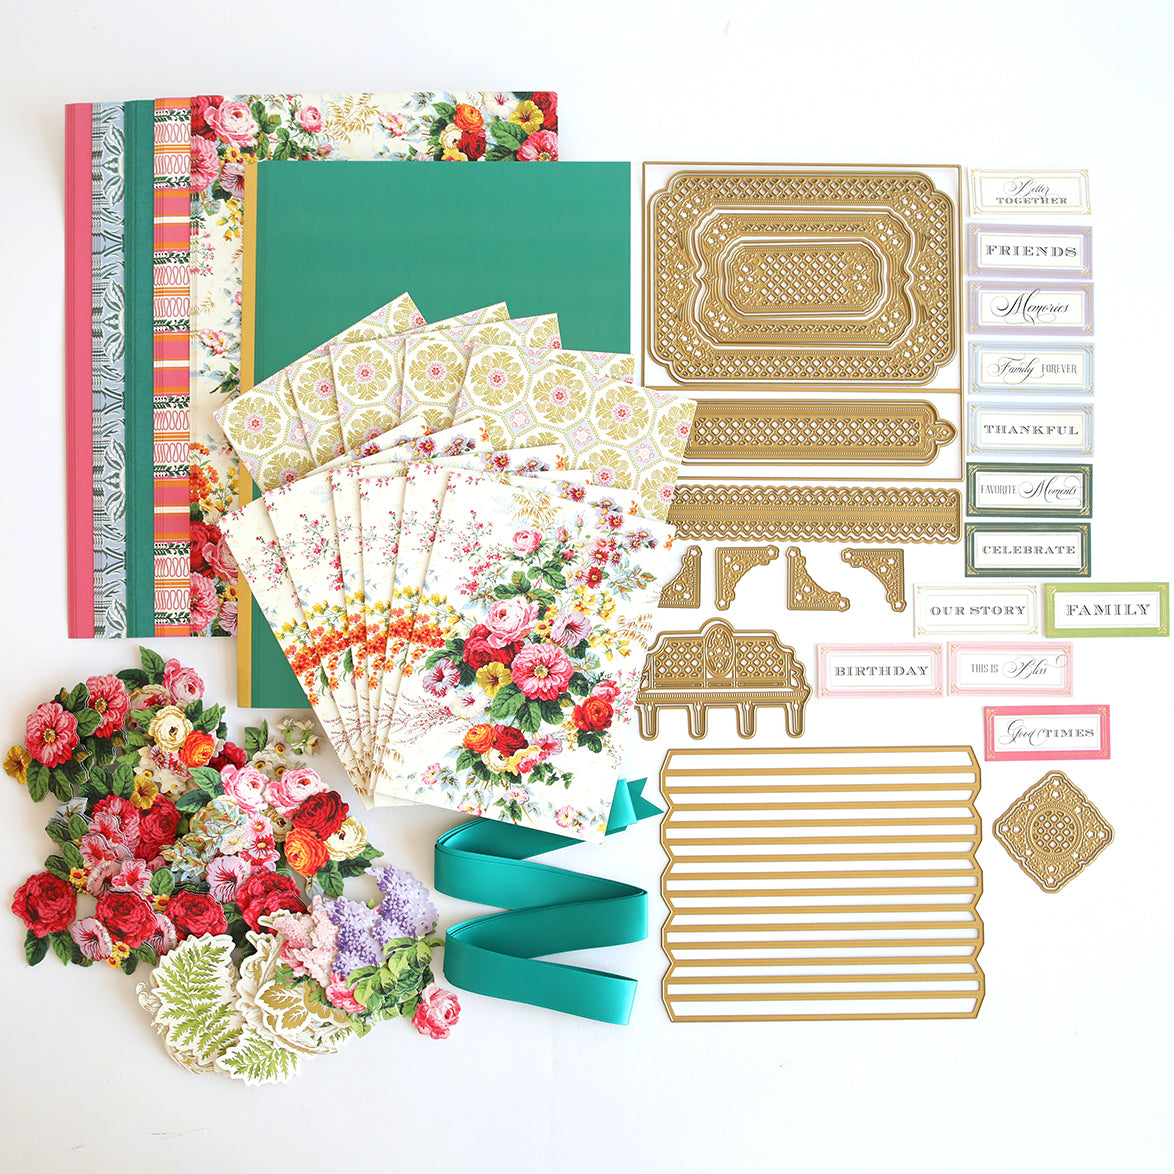 A memory collection of papers, ribbons, and embellishments on a white surface, featuring Anna Griffin's Trellis Album Class Materials and Dies.